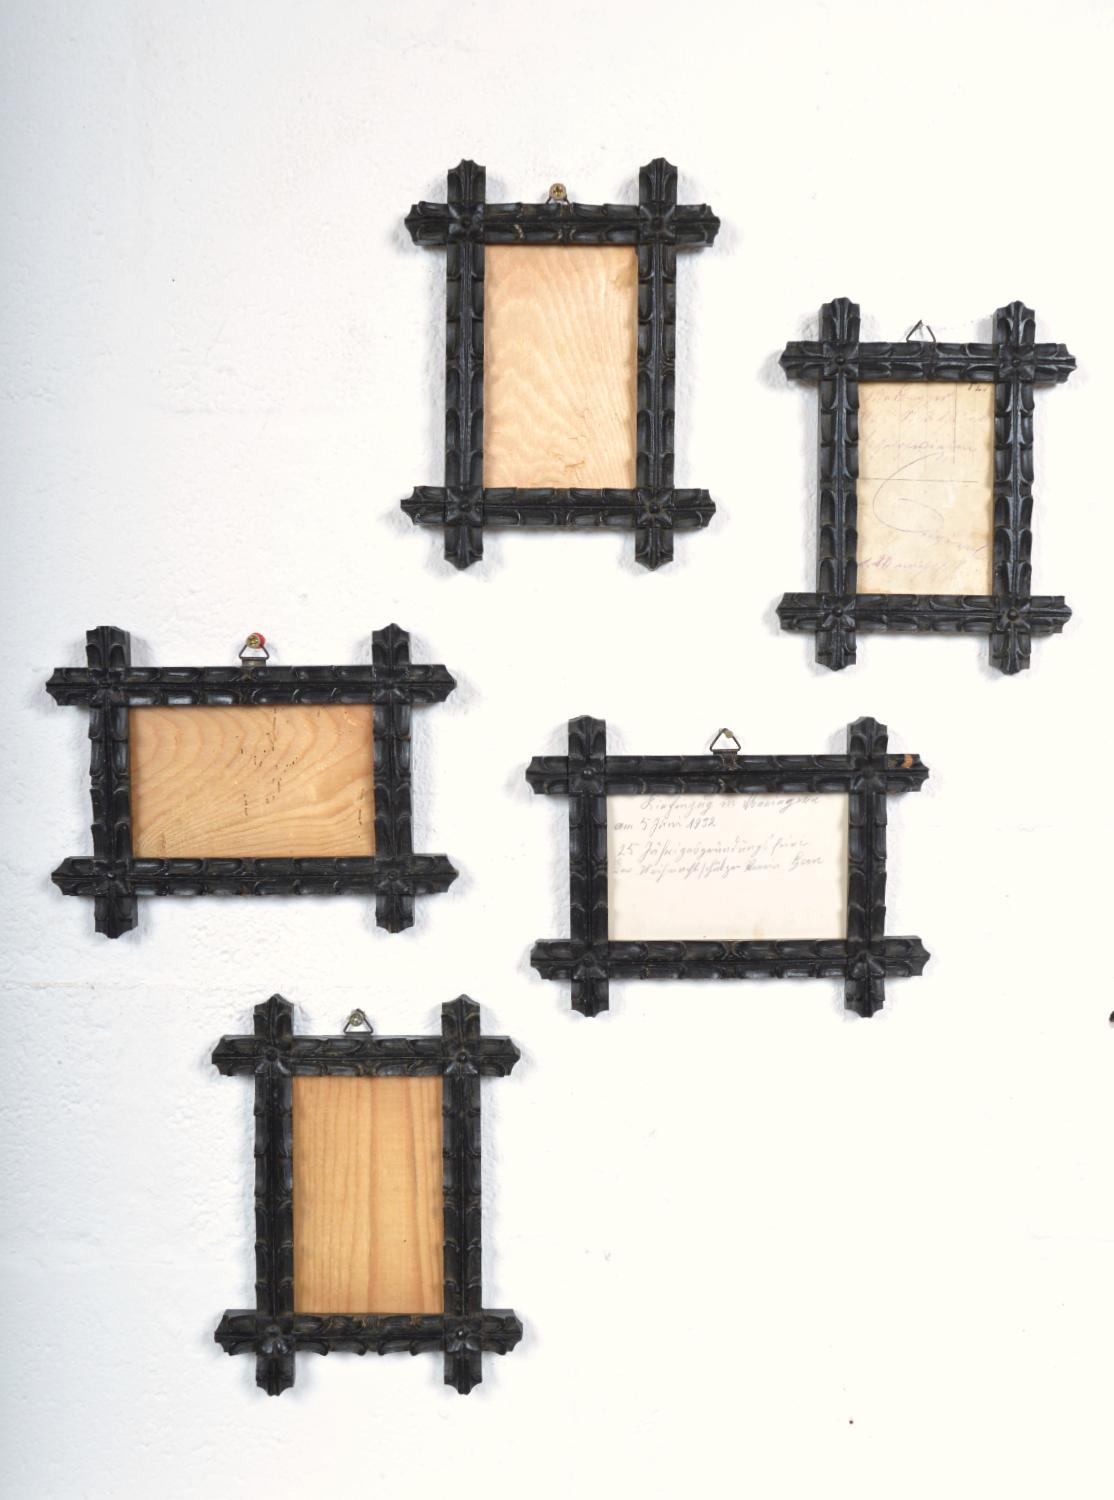 A beautifully carved set of five Bavarian ebonised picture frames elaborately carved using the ‘notch cut’ technique, each frame held together with a cross-lap joint. Dating from the mid 19th Century, the set of five matching hand-carved fruitwood